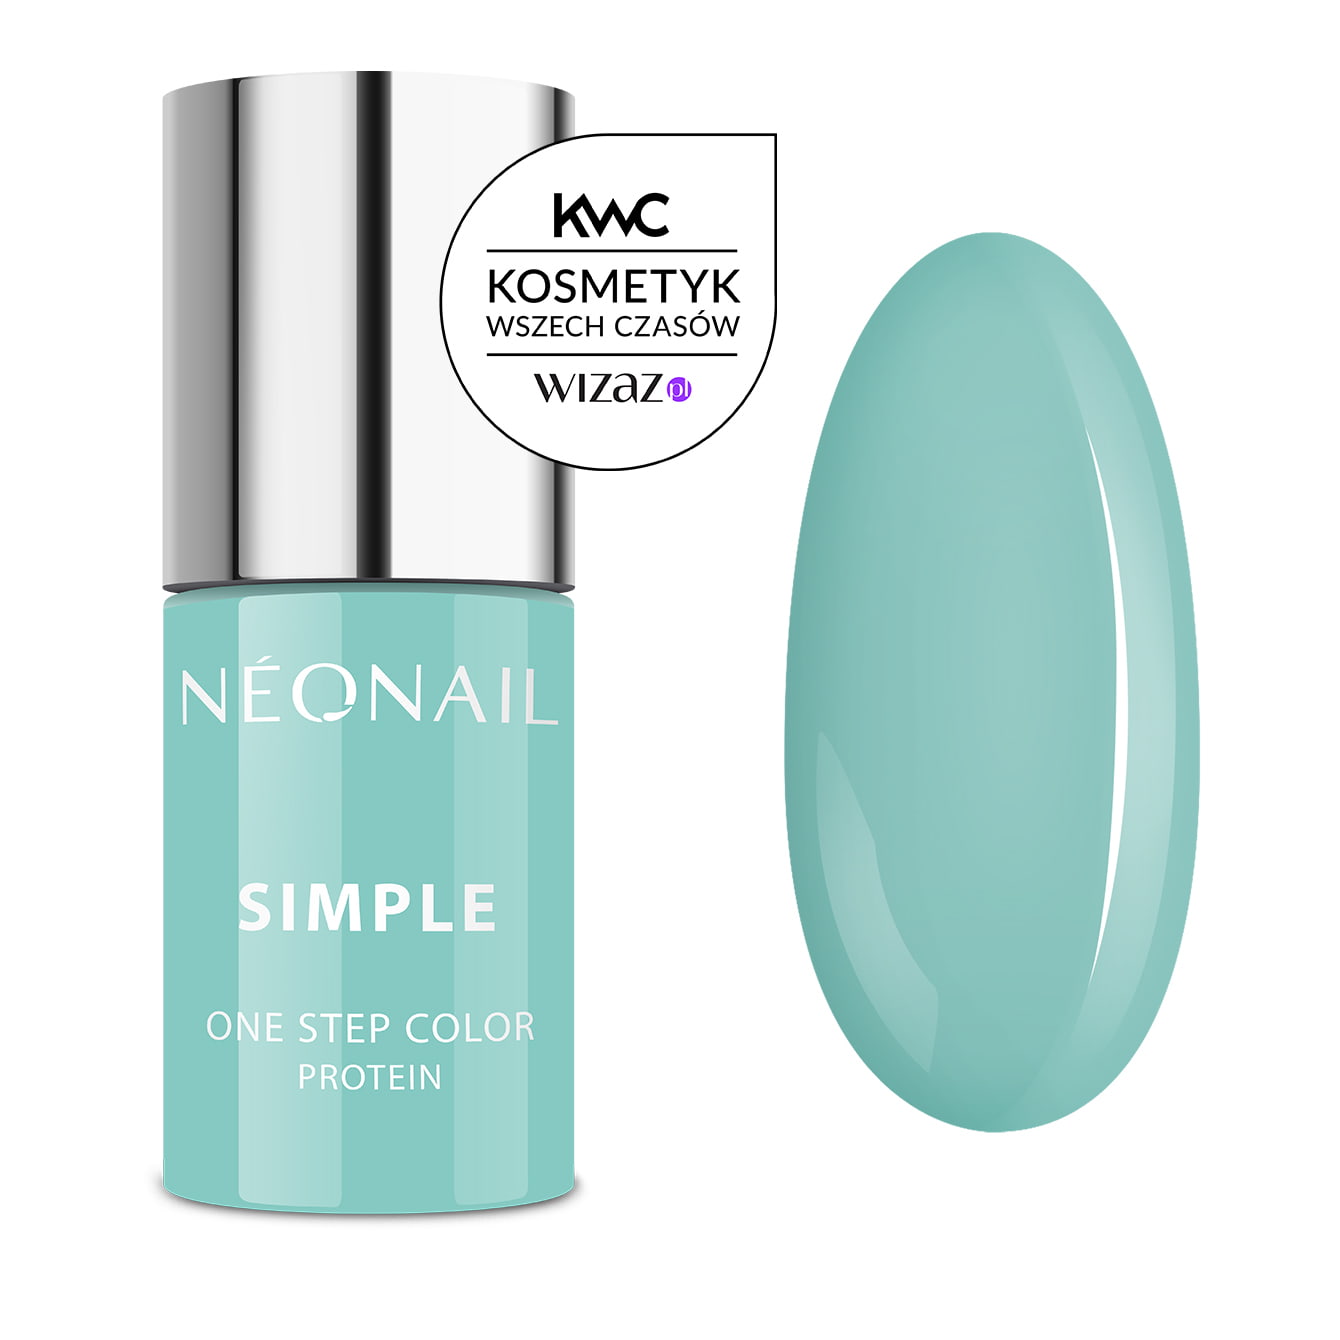 NeoNail Simple One Step Color Protein 7,2ml - Fresh